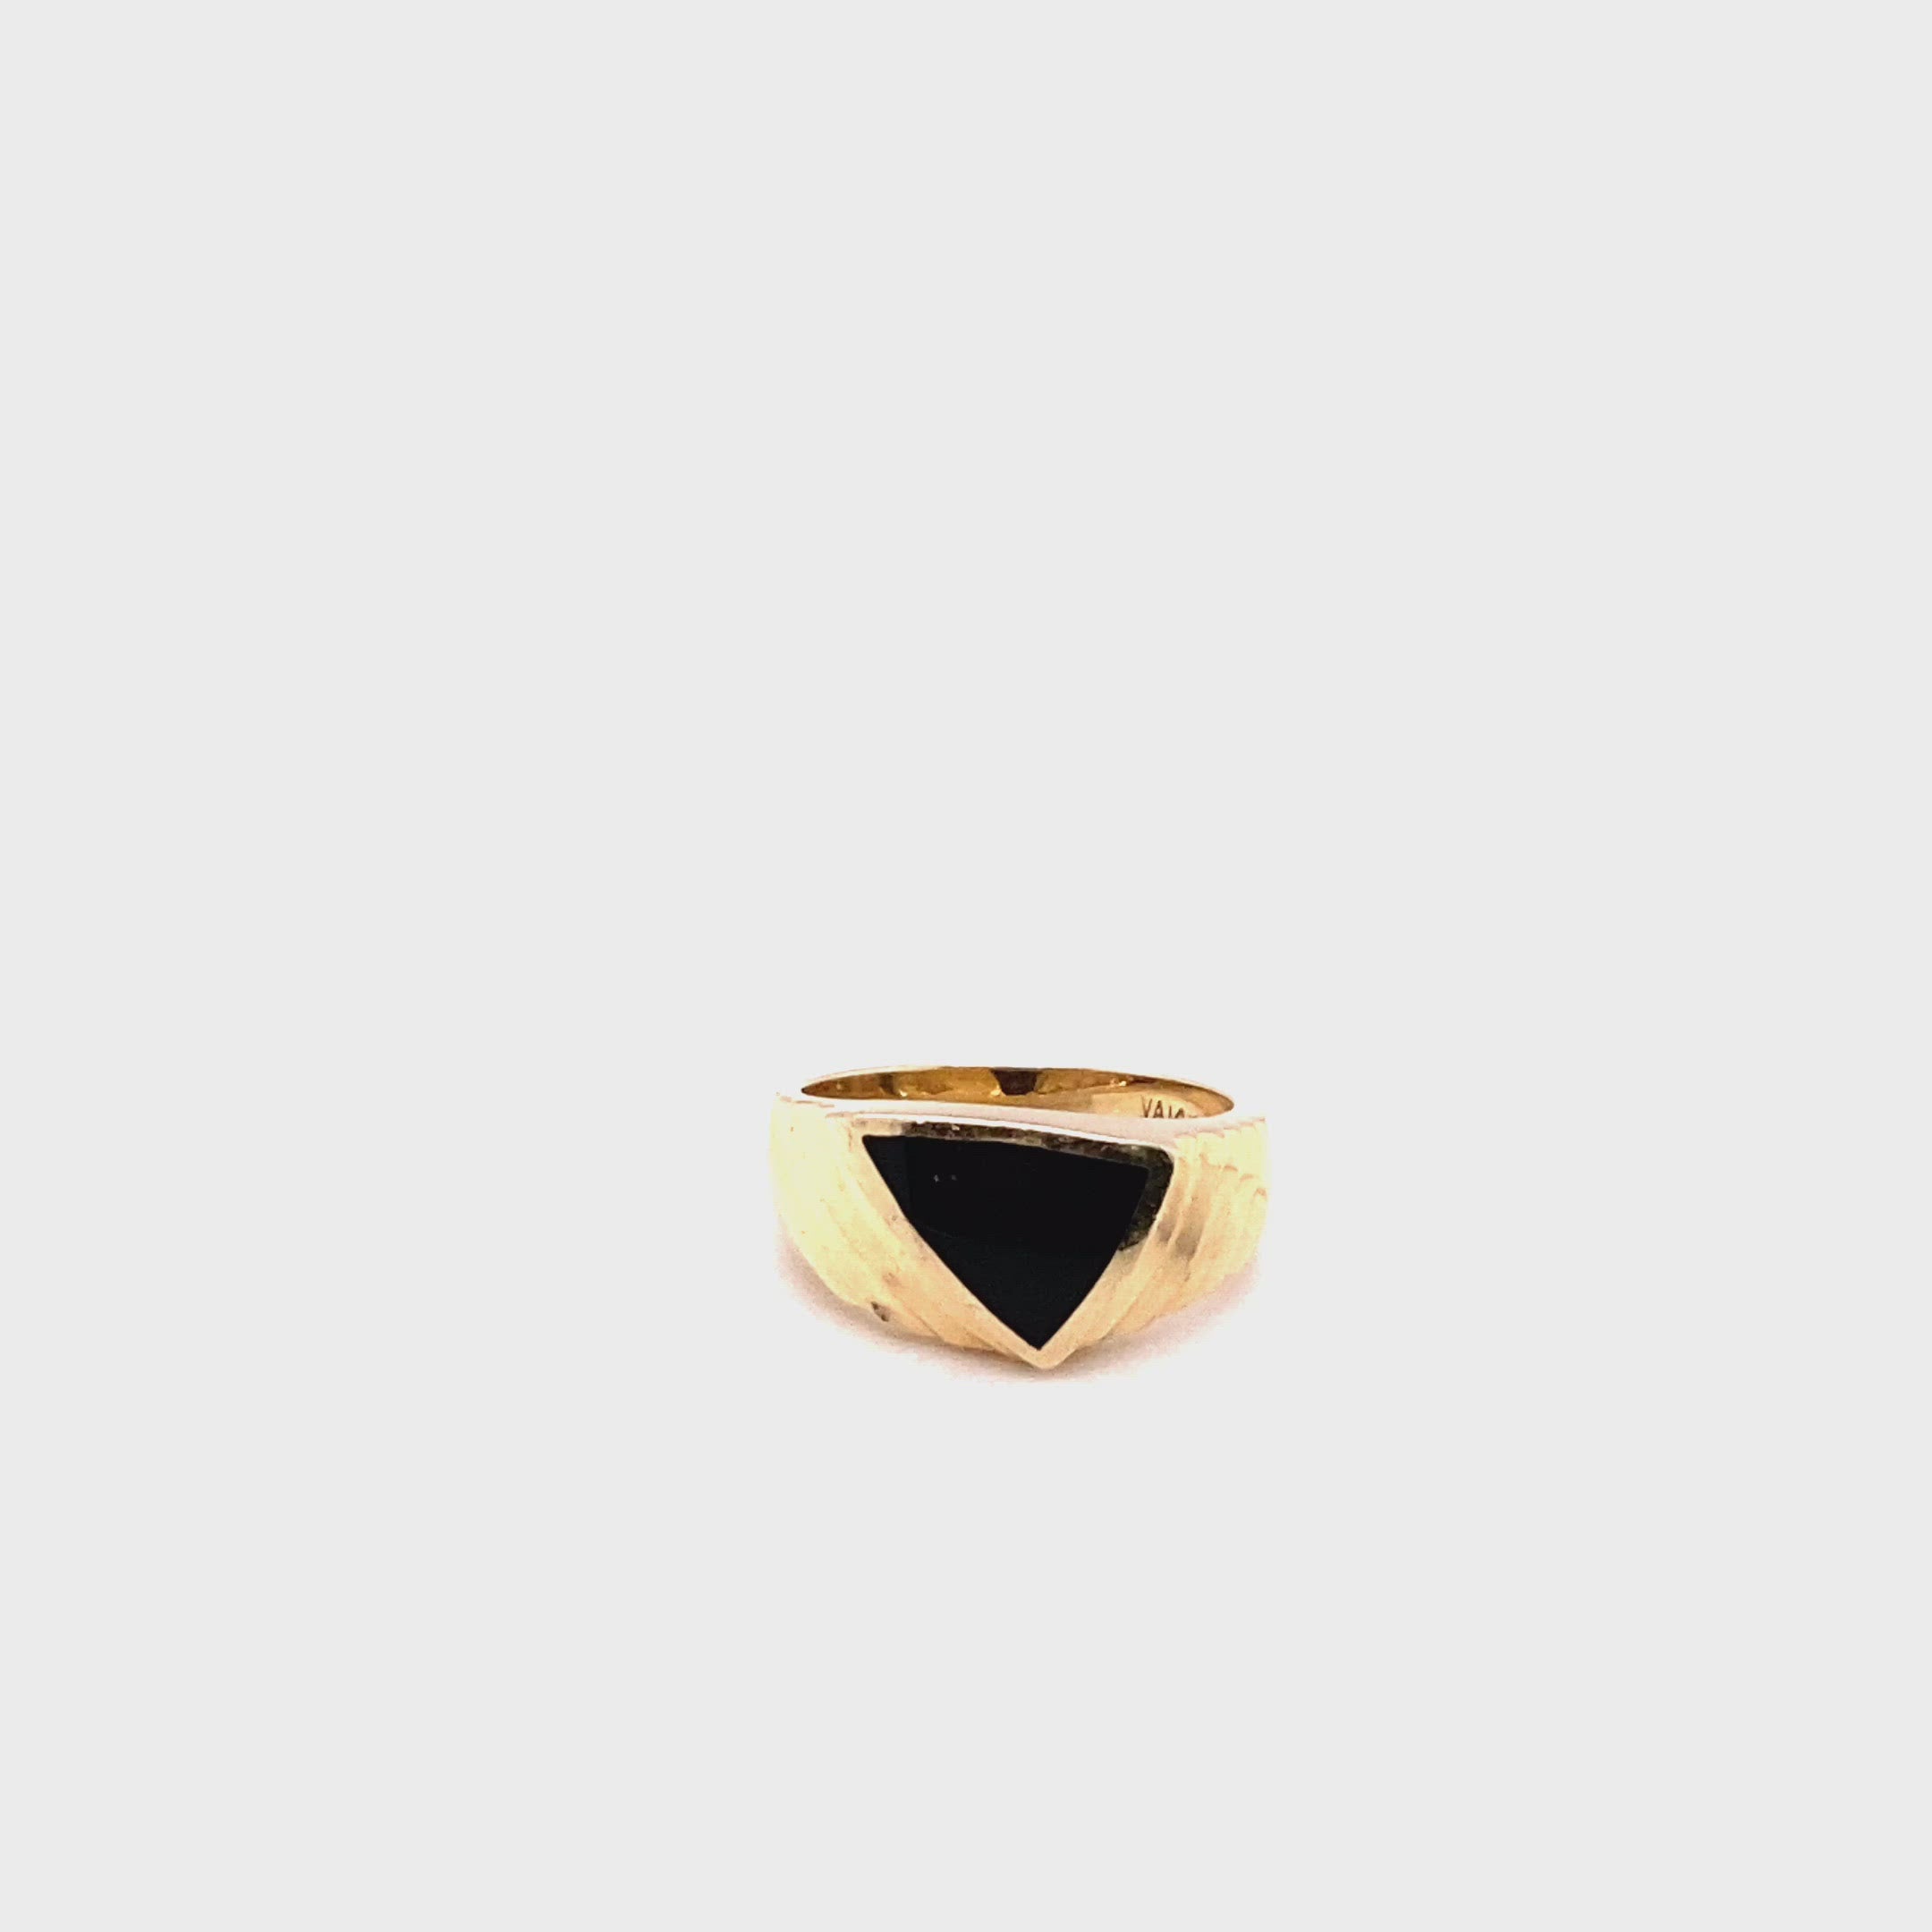 Natural Onyx Ring 14K Solid Gold Men's Ring Gemstone Ring Statement Ring Cocktail Ring Fine Jewelry Vintage Jewelry Estate Jewelry